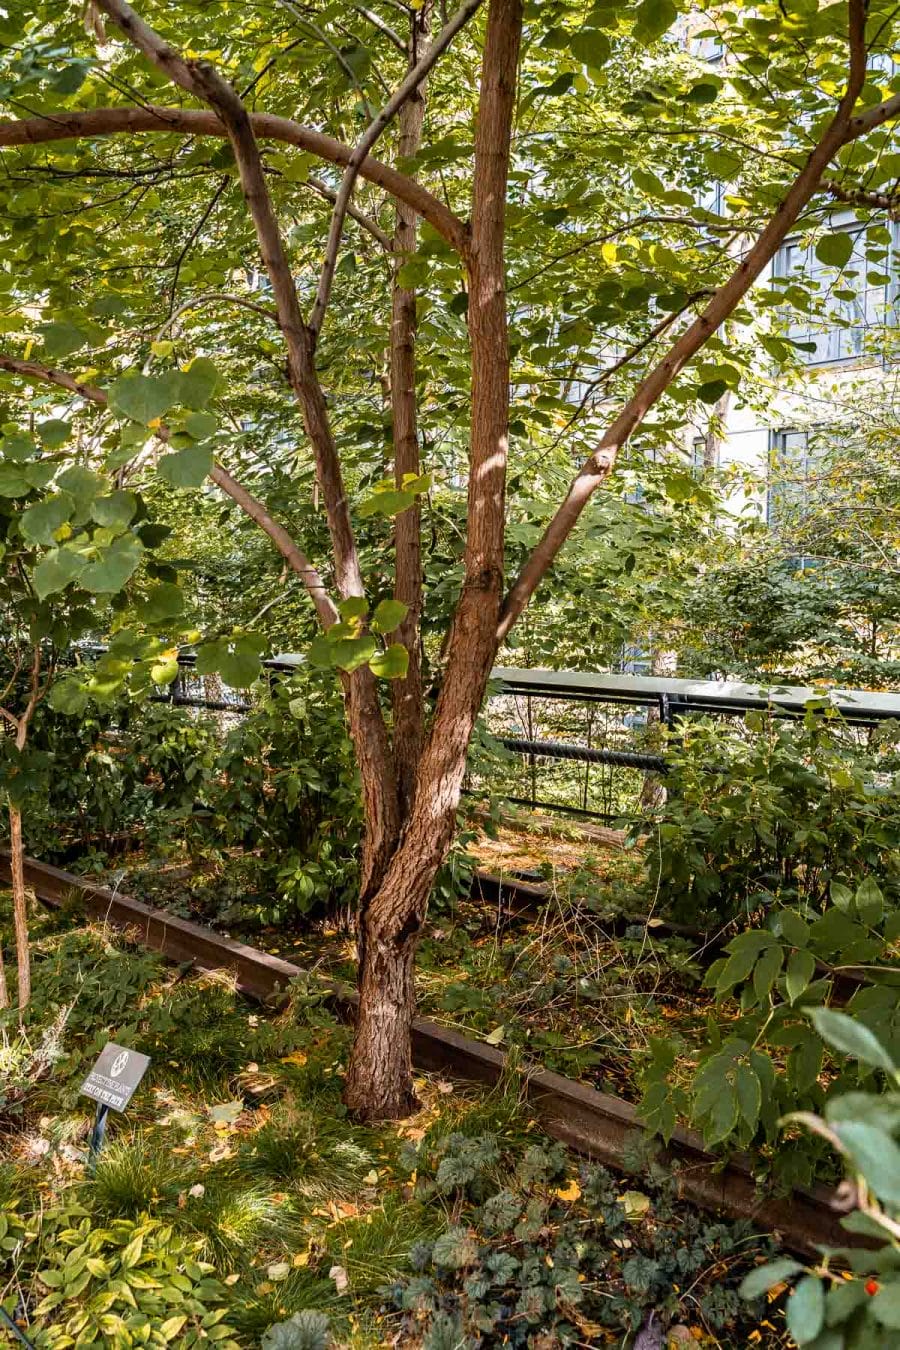 Trees growing among the abandoned railways at the High Line, New York